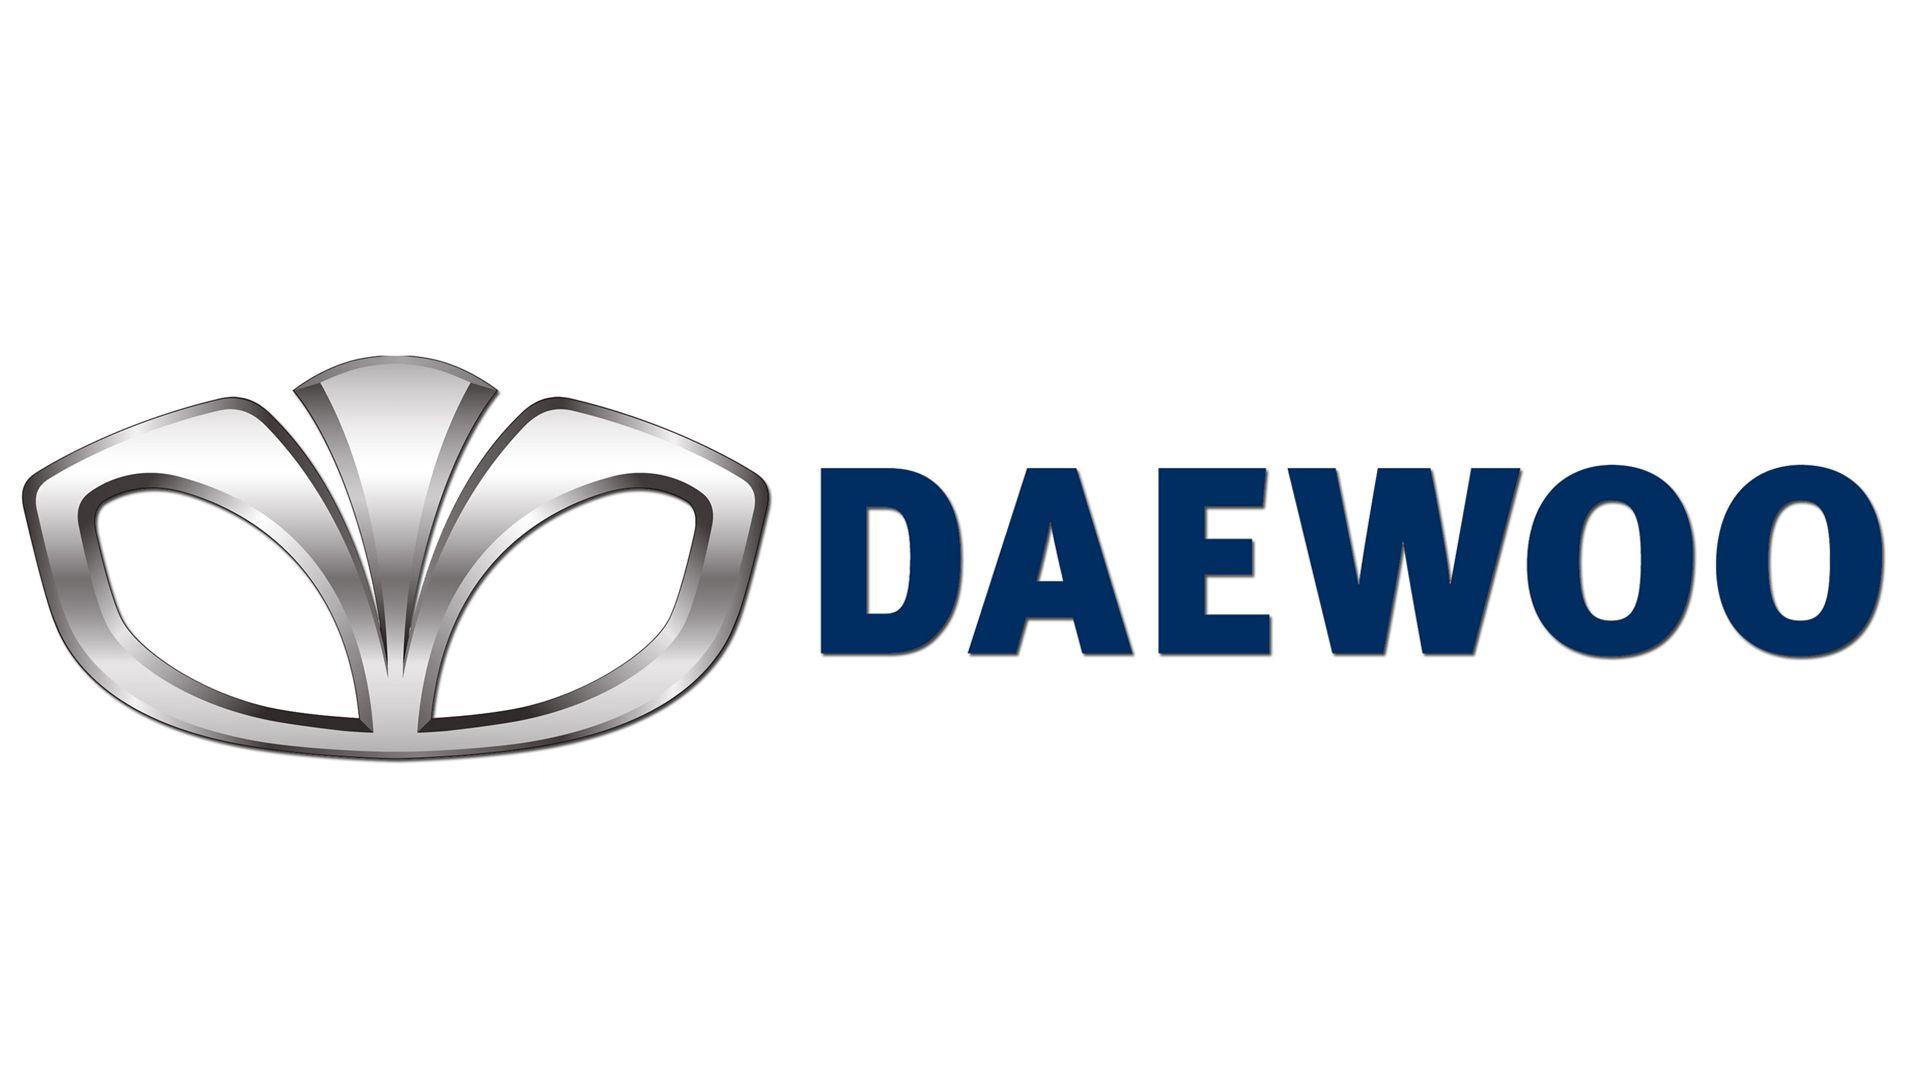 Daewoo Logo - Daewoo Logo Meaning and History, latest models. World Cars Brands